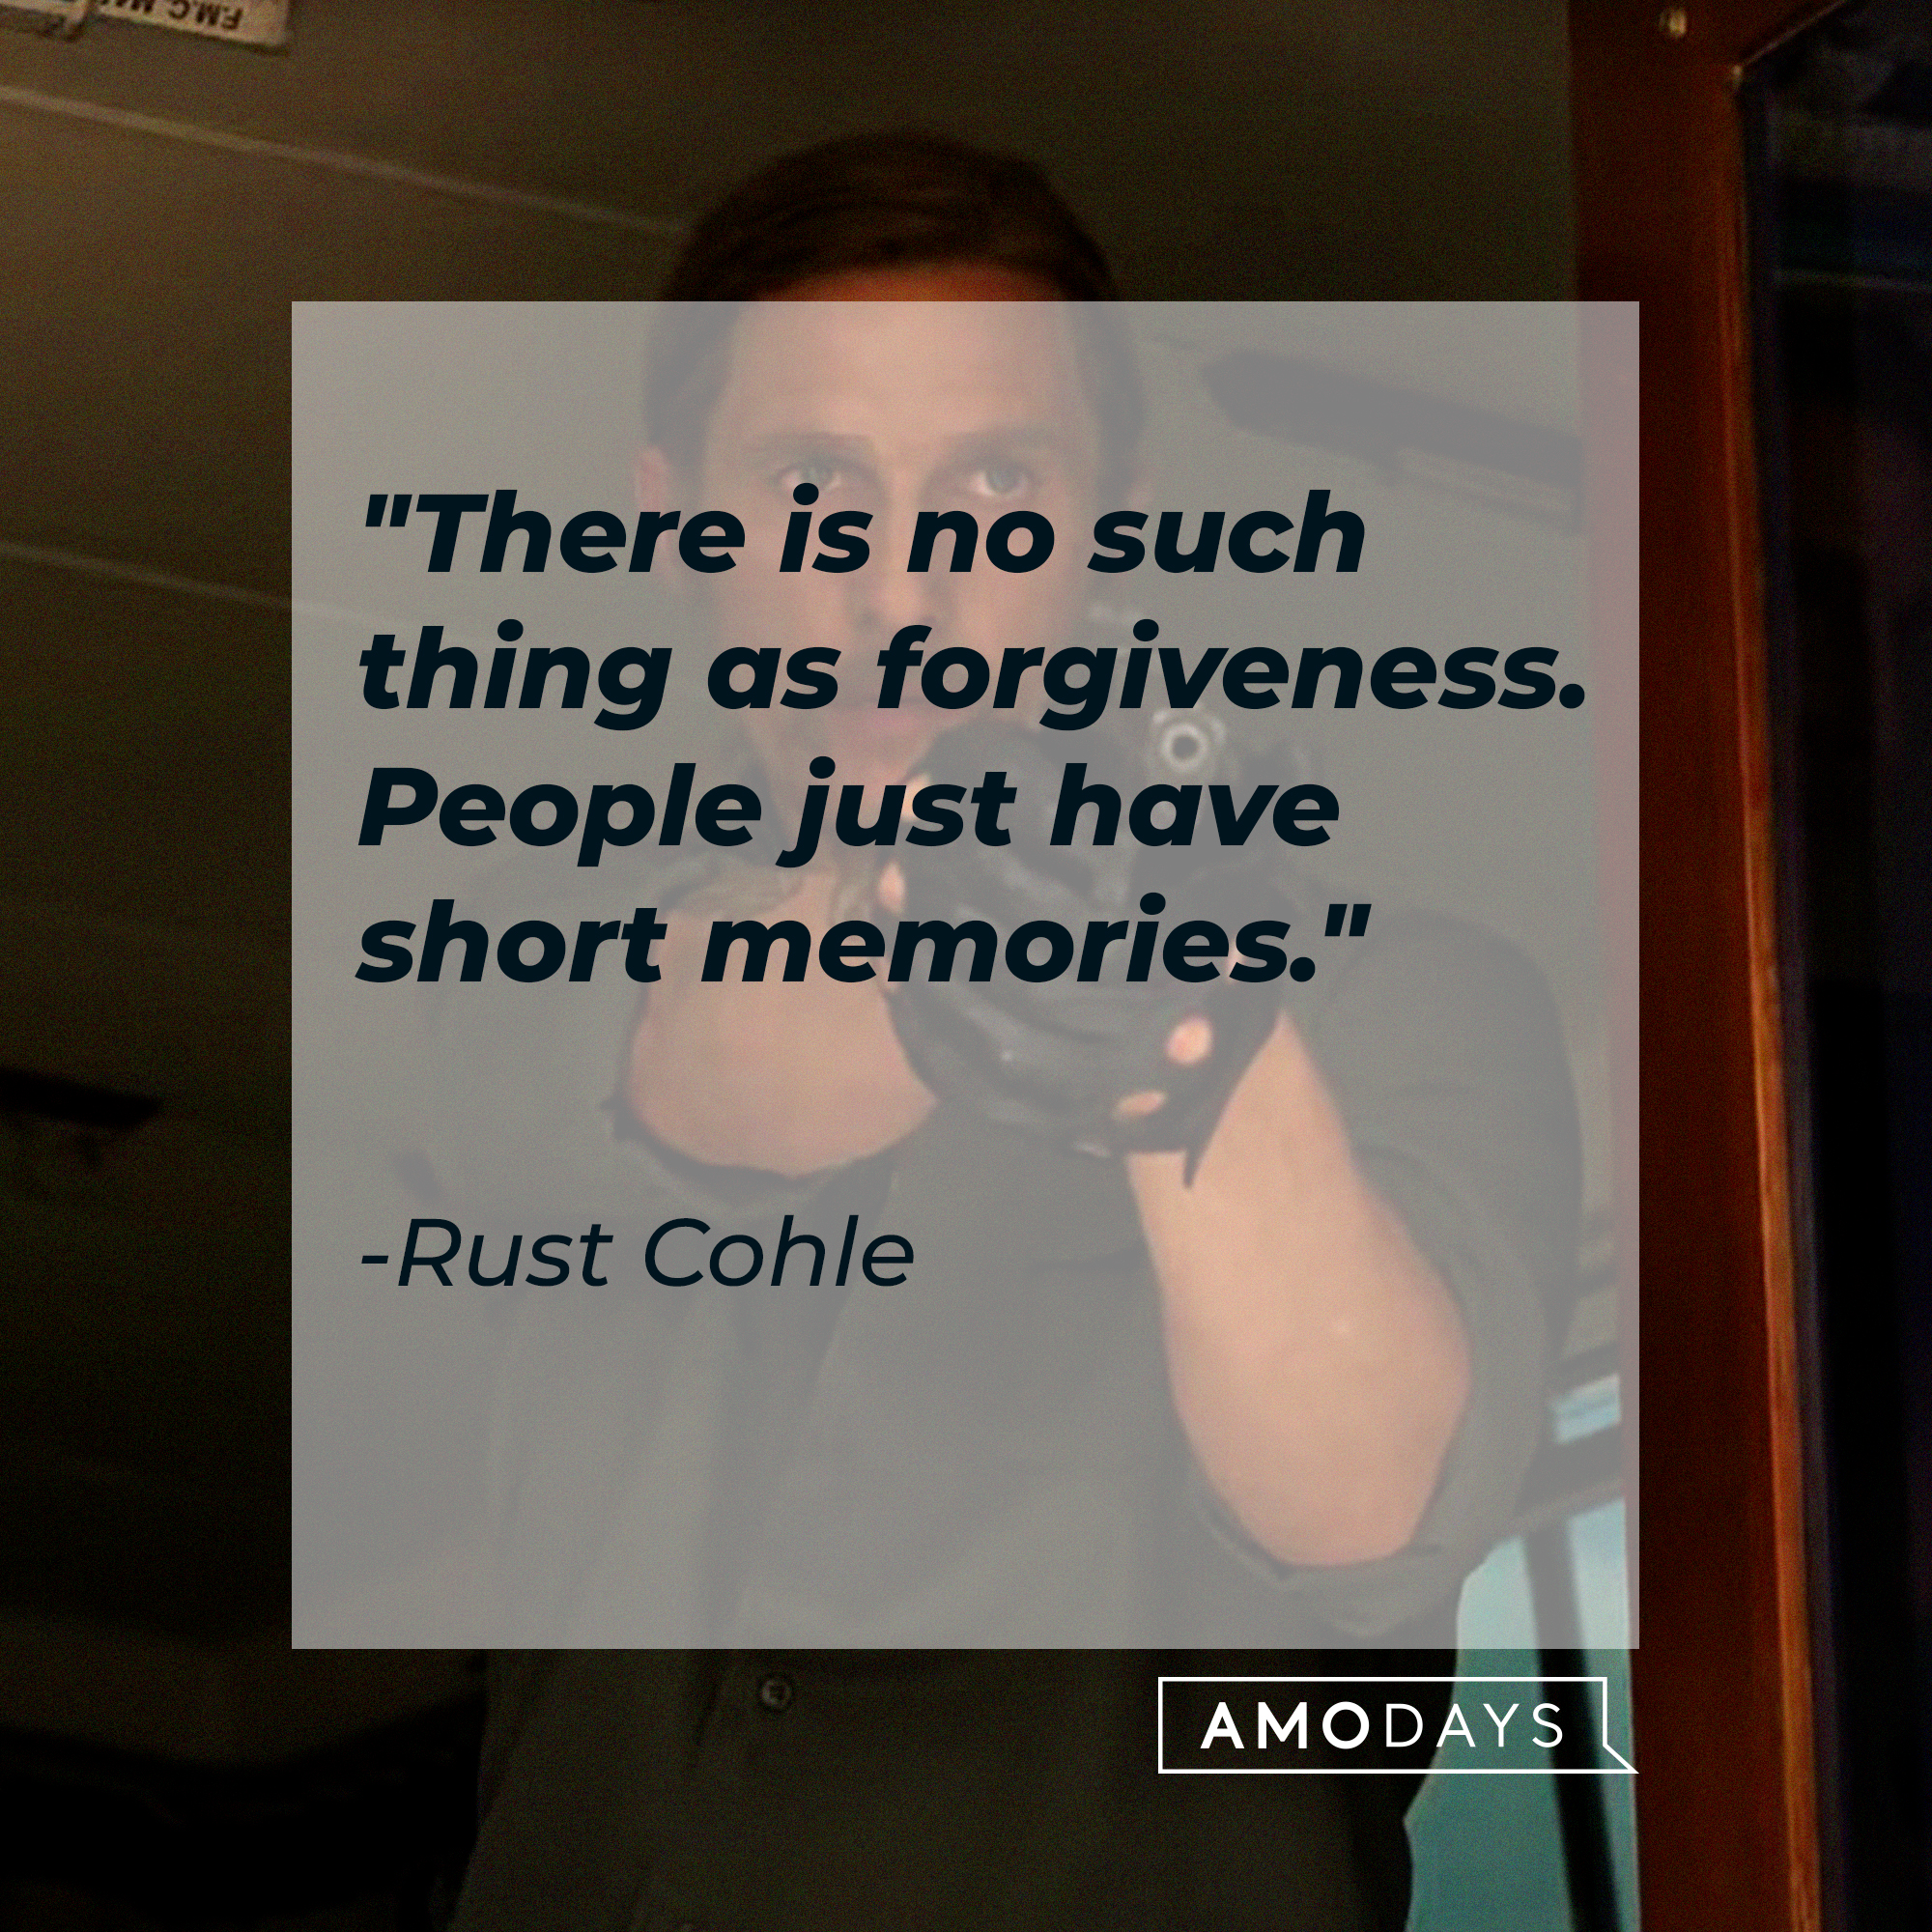 Rust Cohle's quote: "There is no such thing as forgiveness. People just have short memories." | Source: facebook.com/TrueDetective